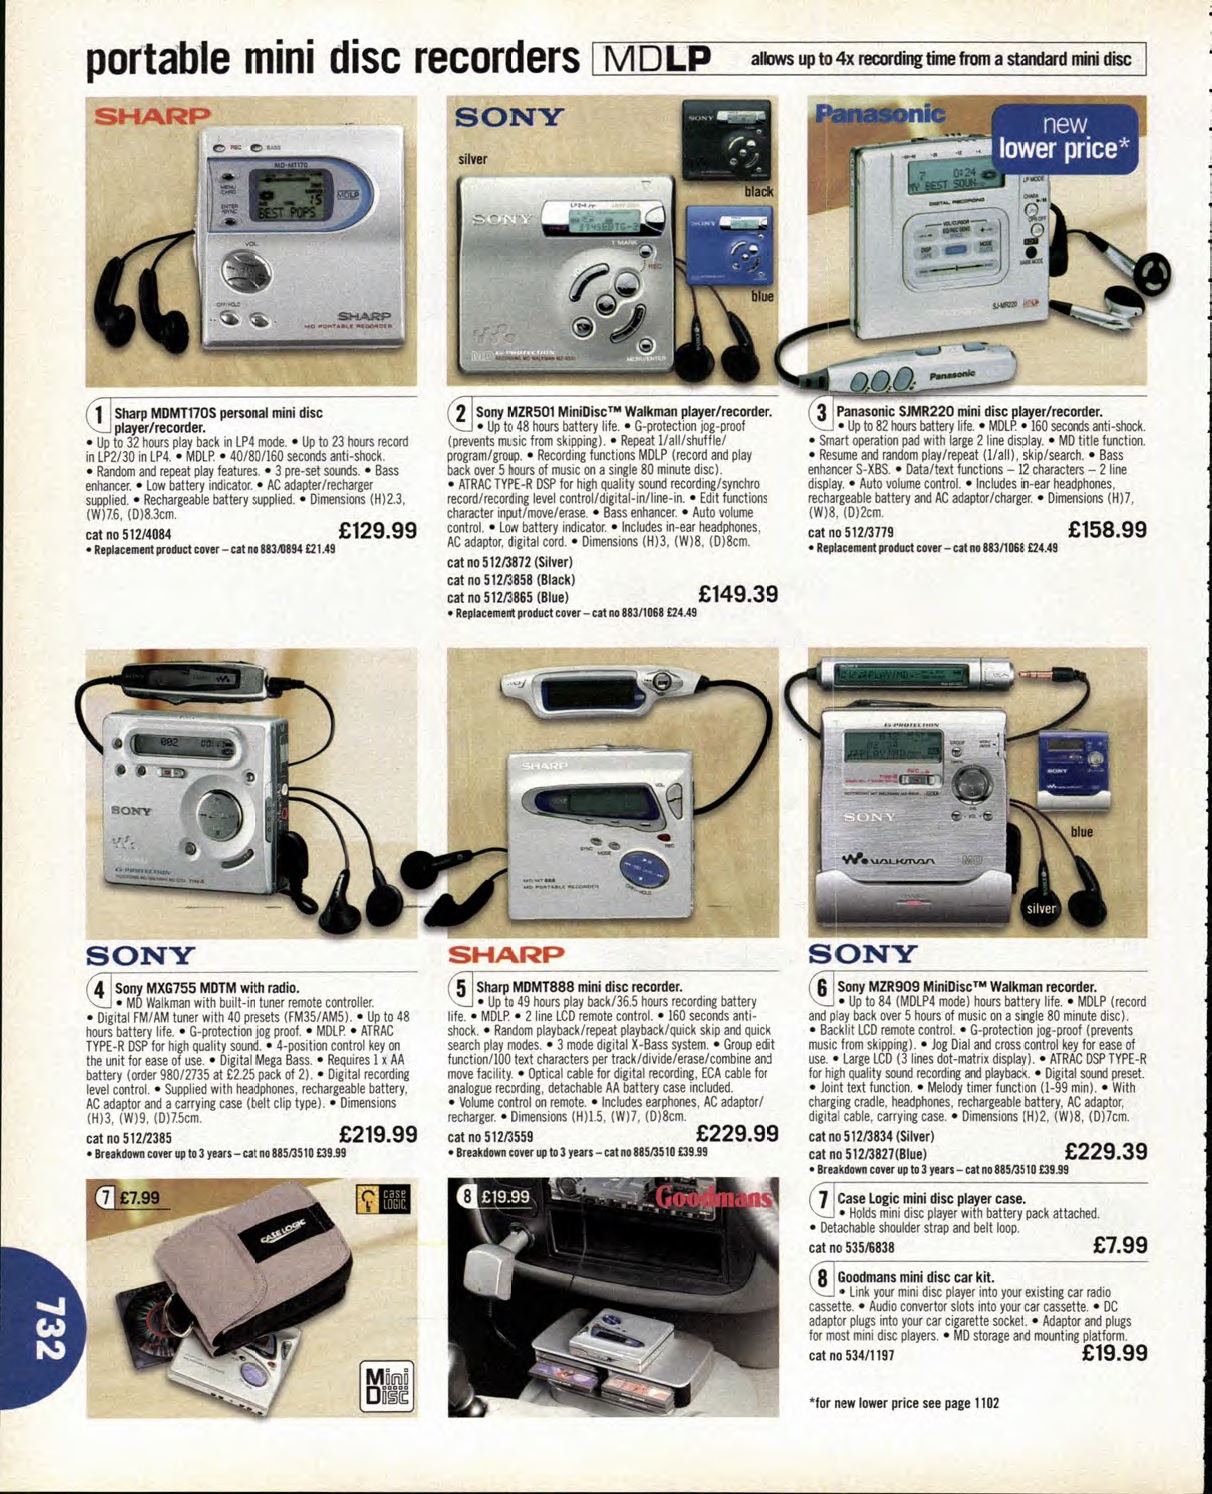 The MiniDisc Page